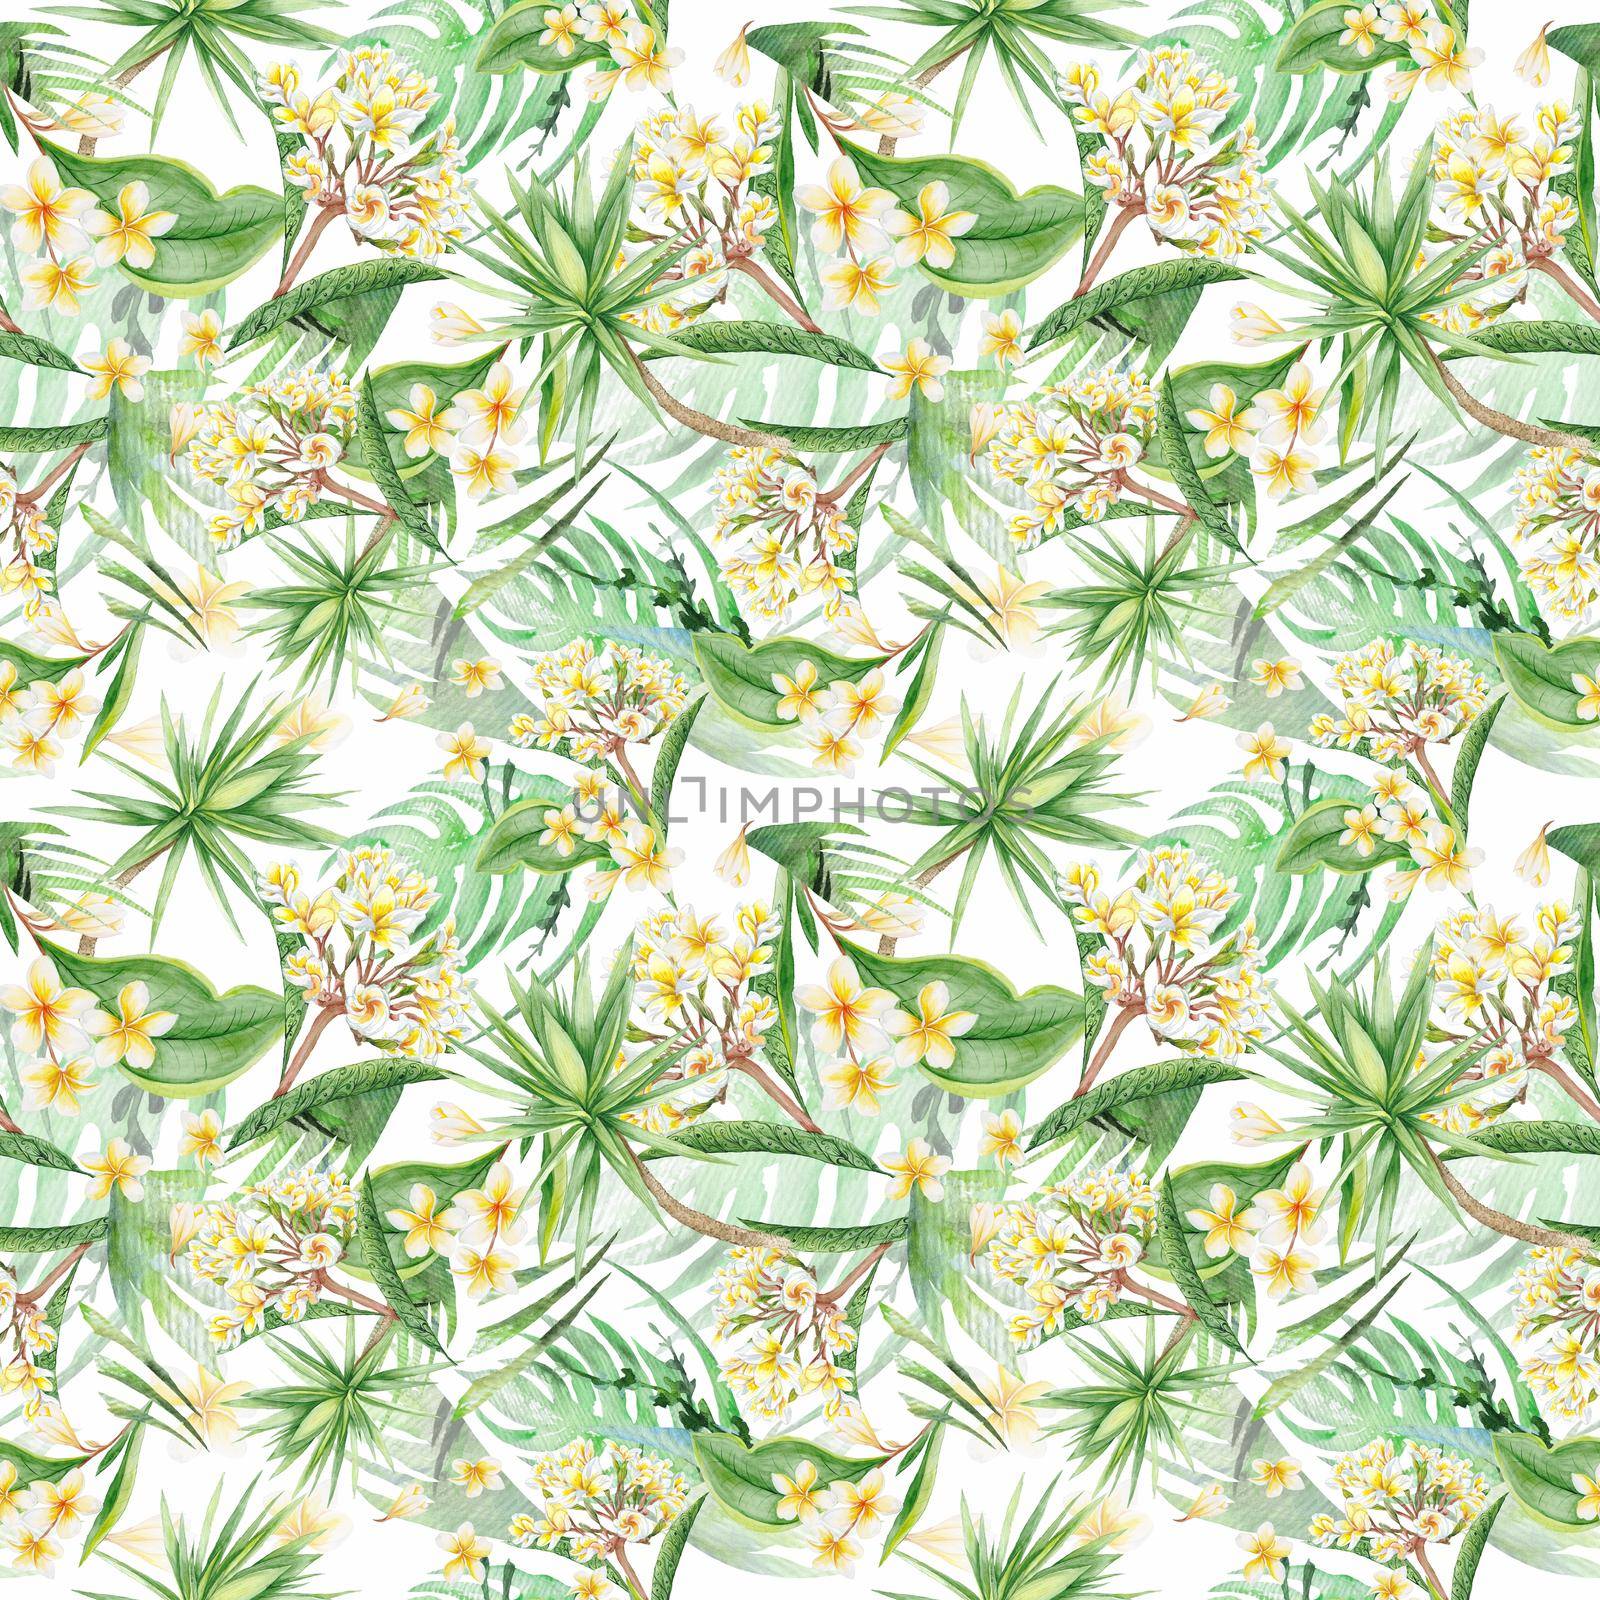 Watercolor Floral Exotic Tropical Seamless Eco Pattern by kisika